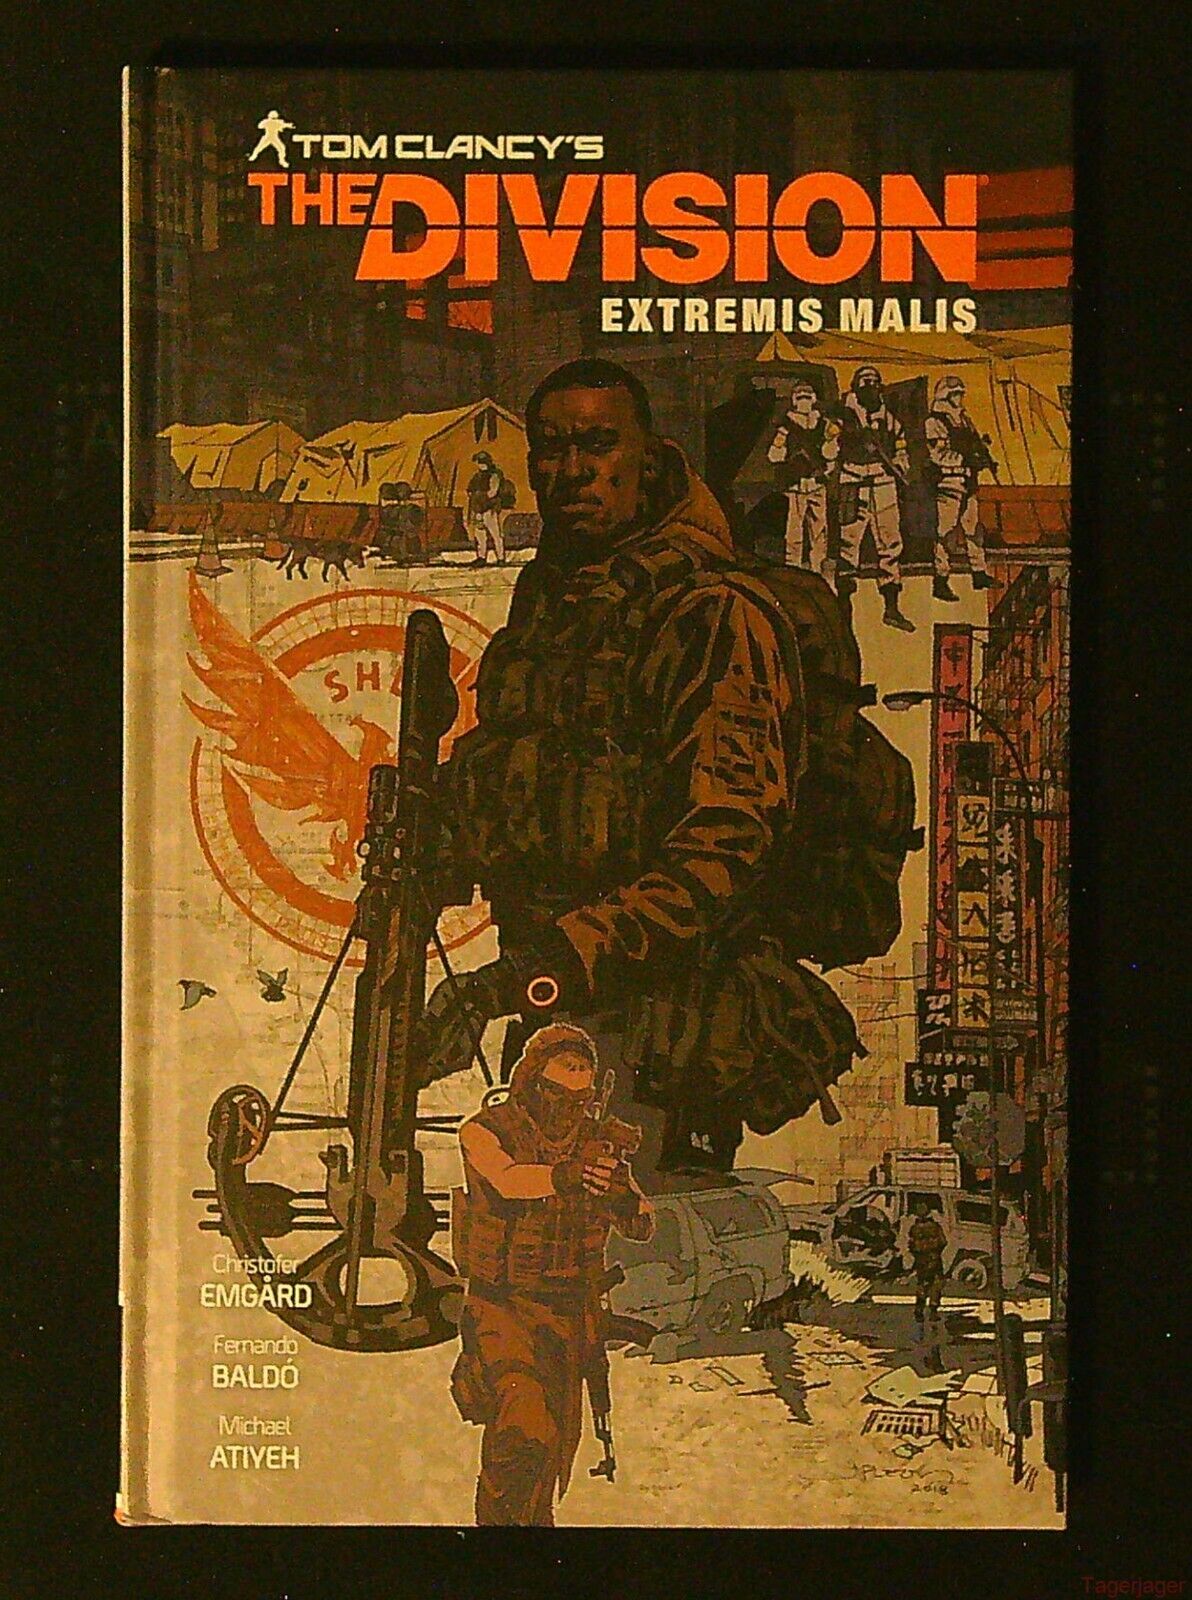 Tom Clancy's the Division: Extremis Malis Complete Story - Hardcover